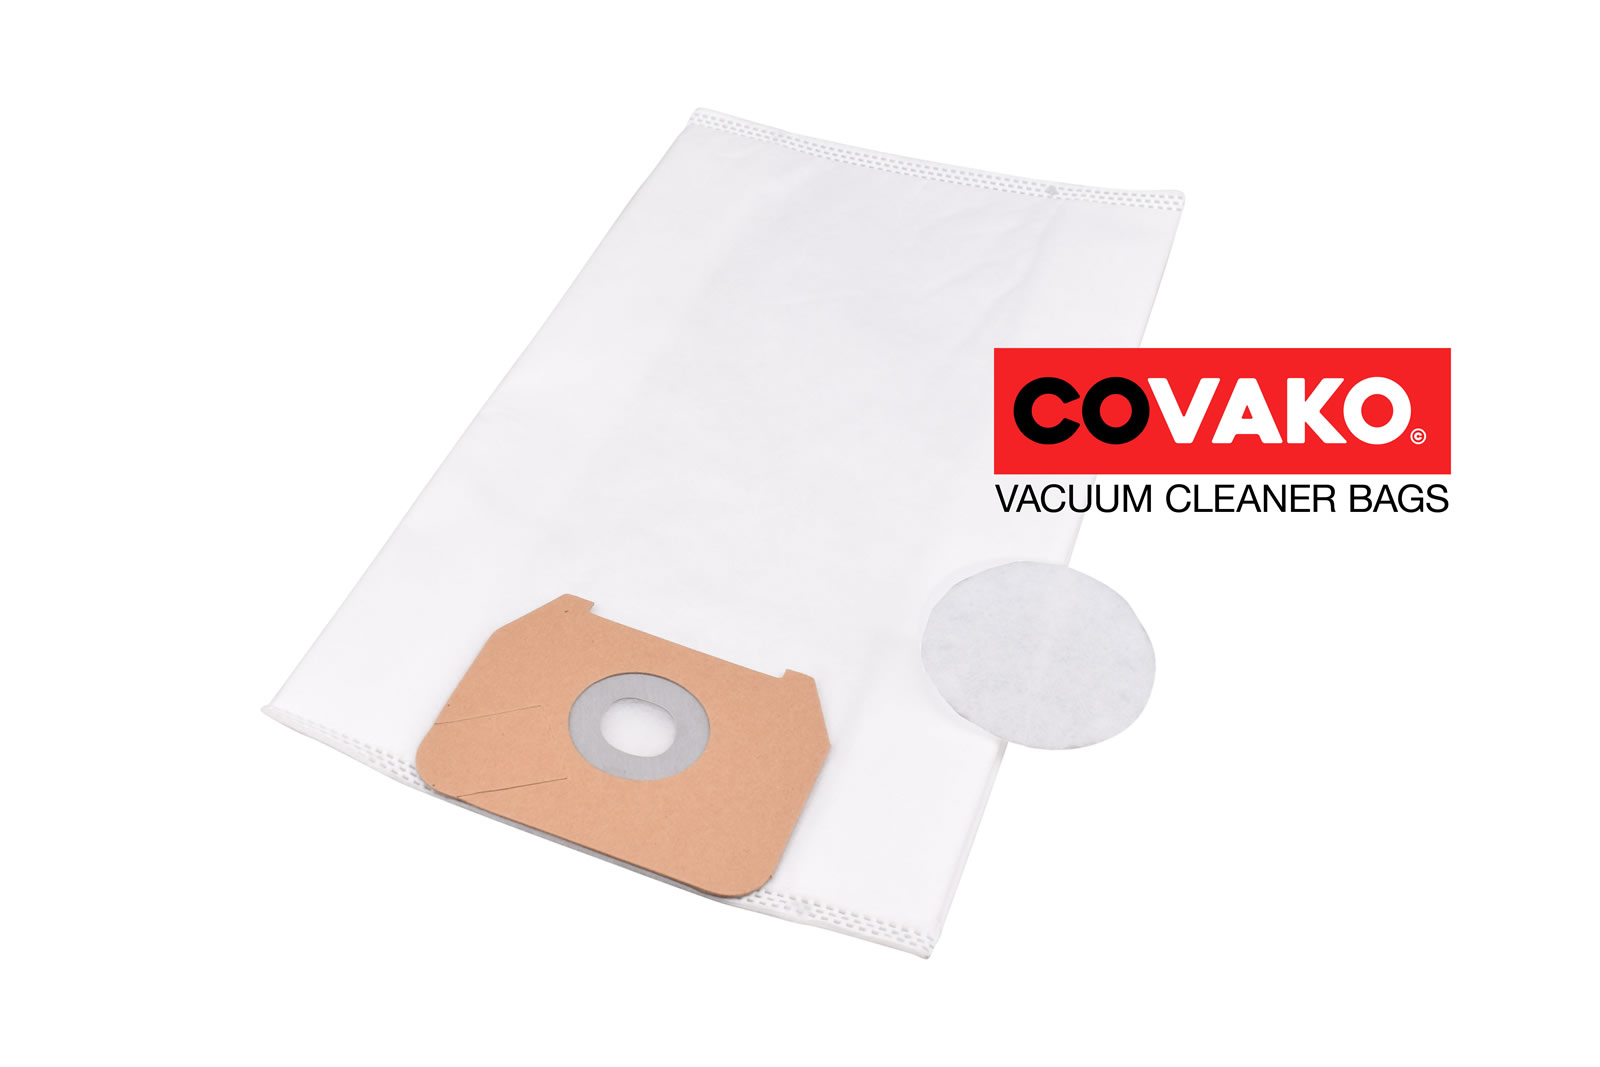 I-vac Silent 11 Basic / Synthesis - I-vac vacuum cleaner bags